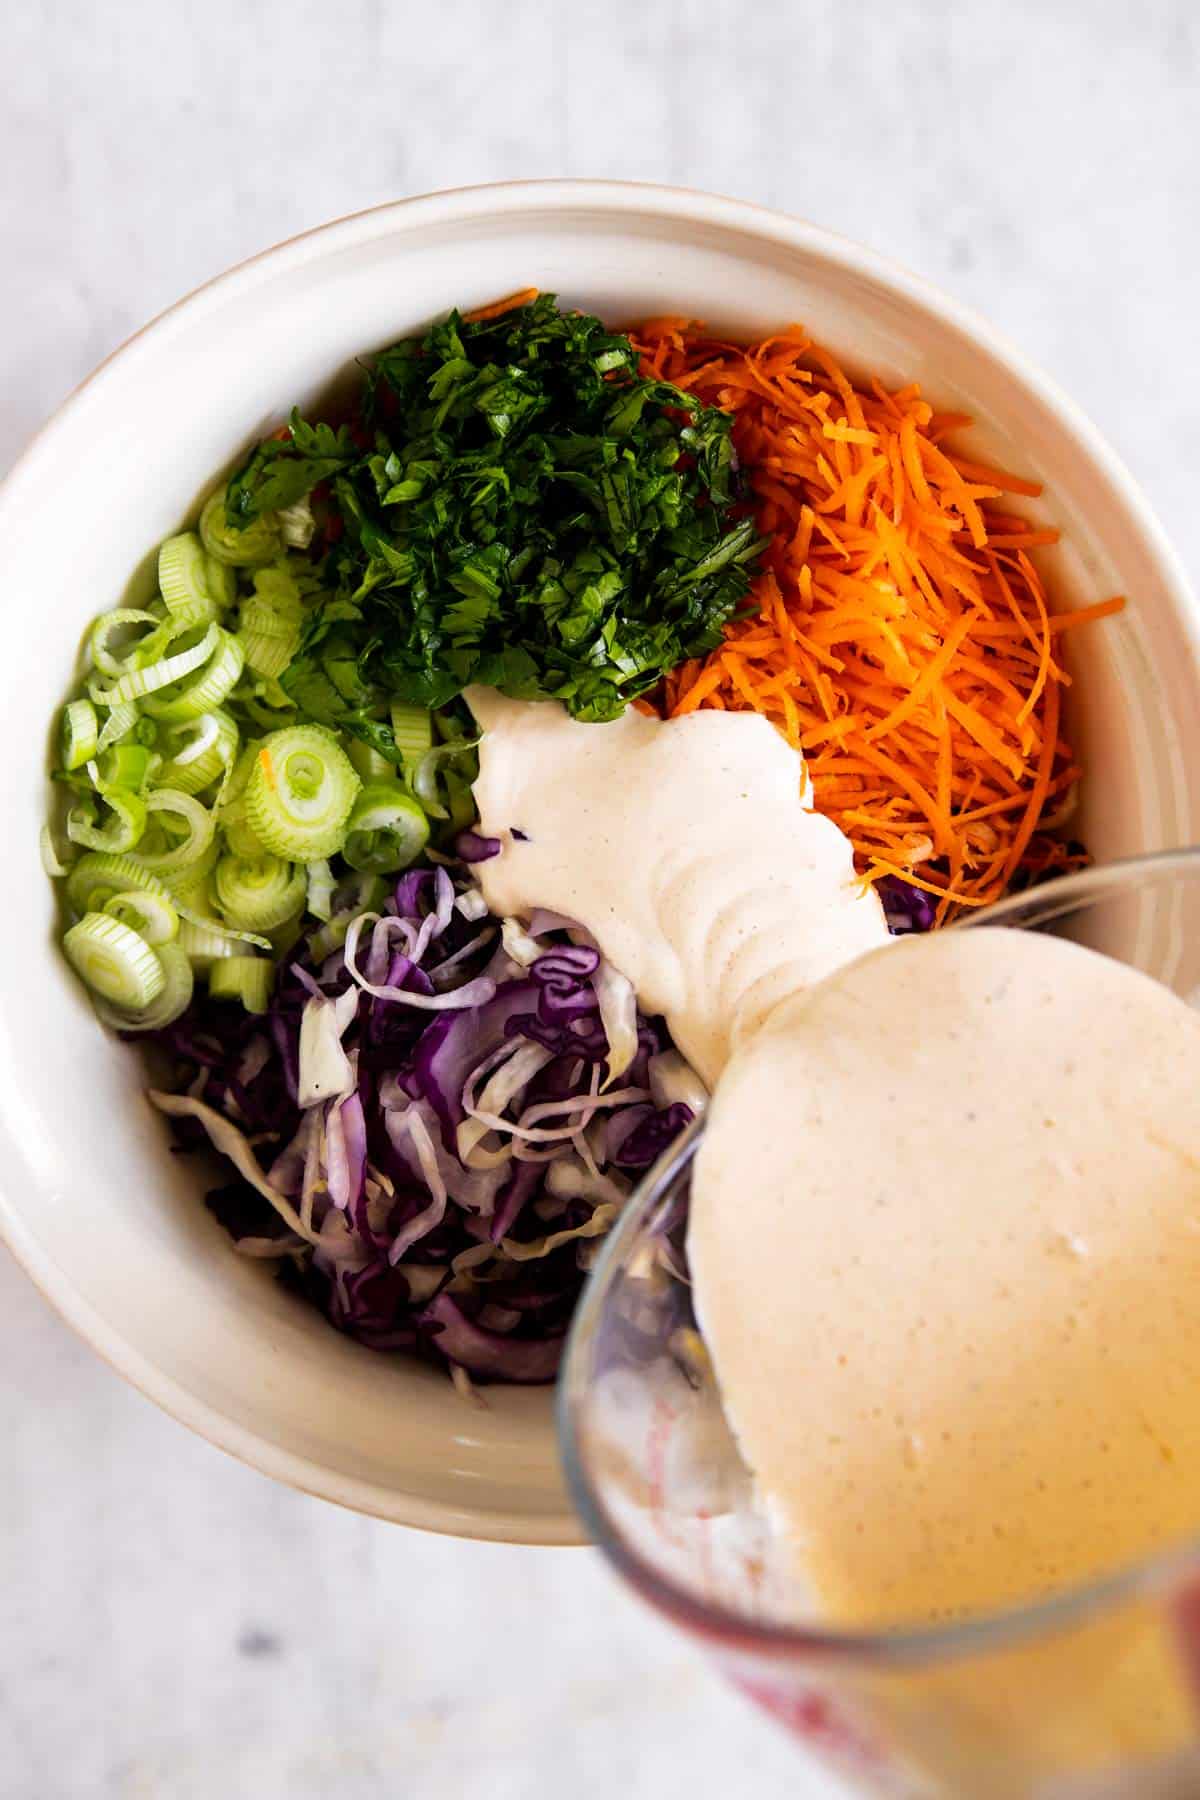 pouring dressing over coleslaw ingredients